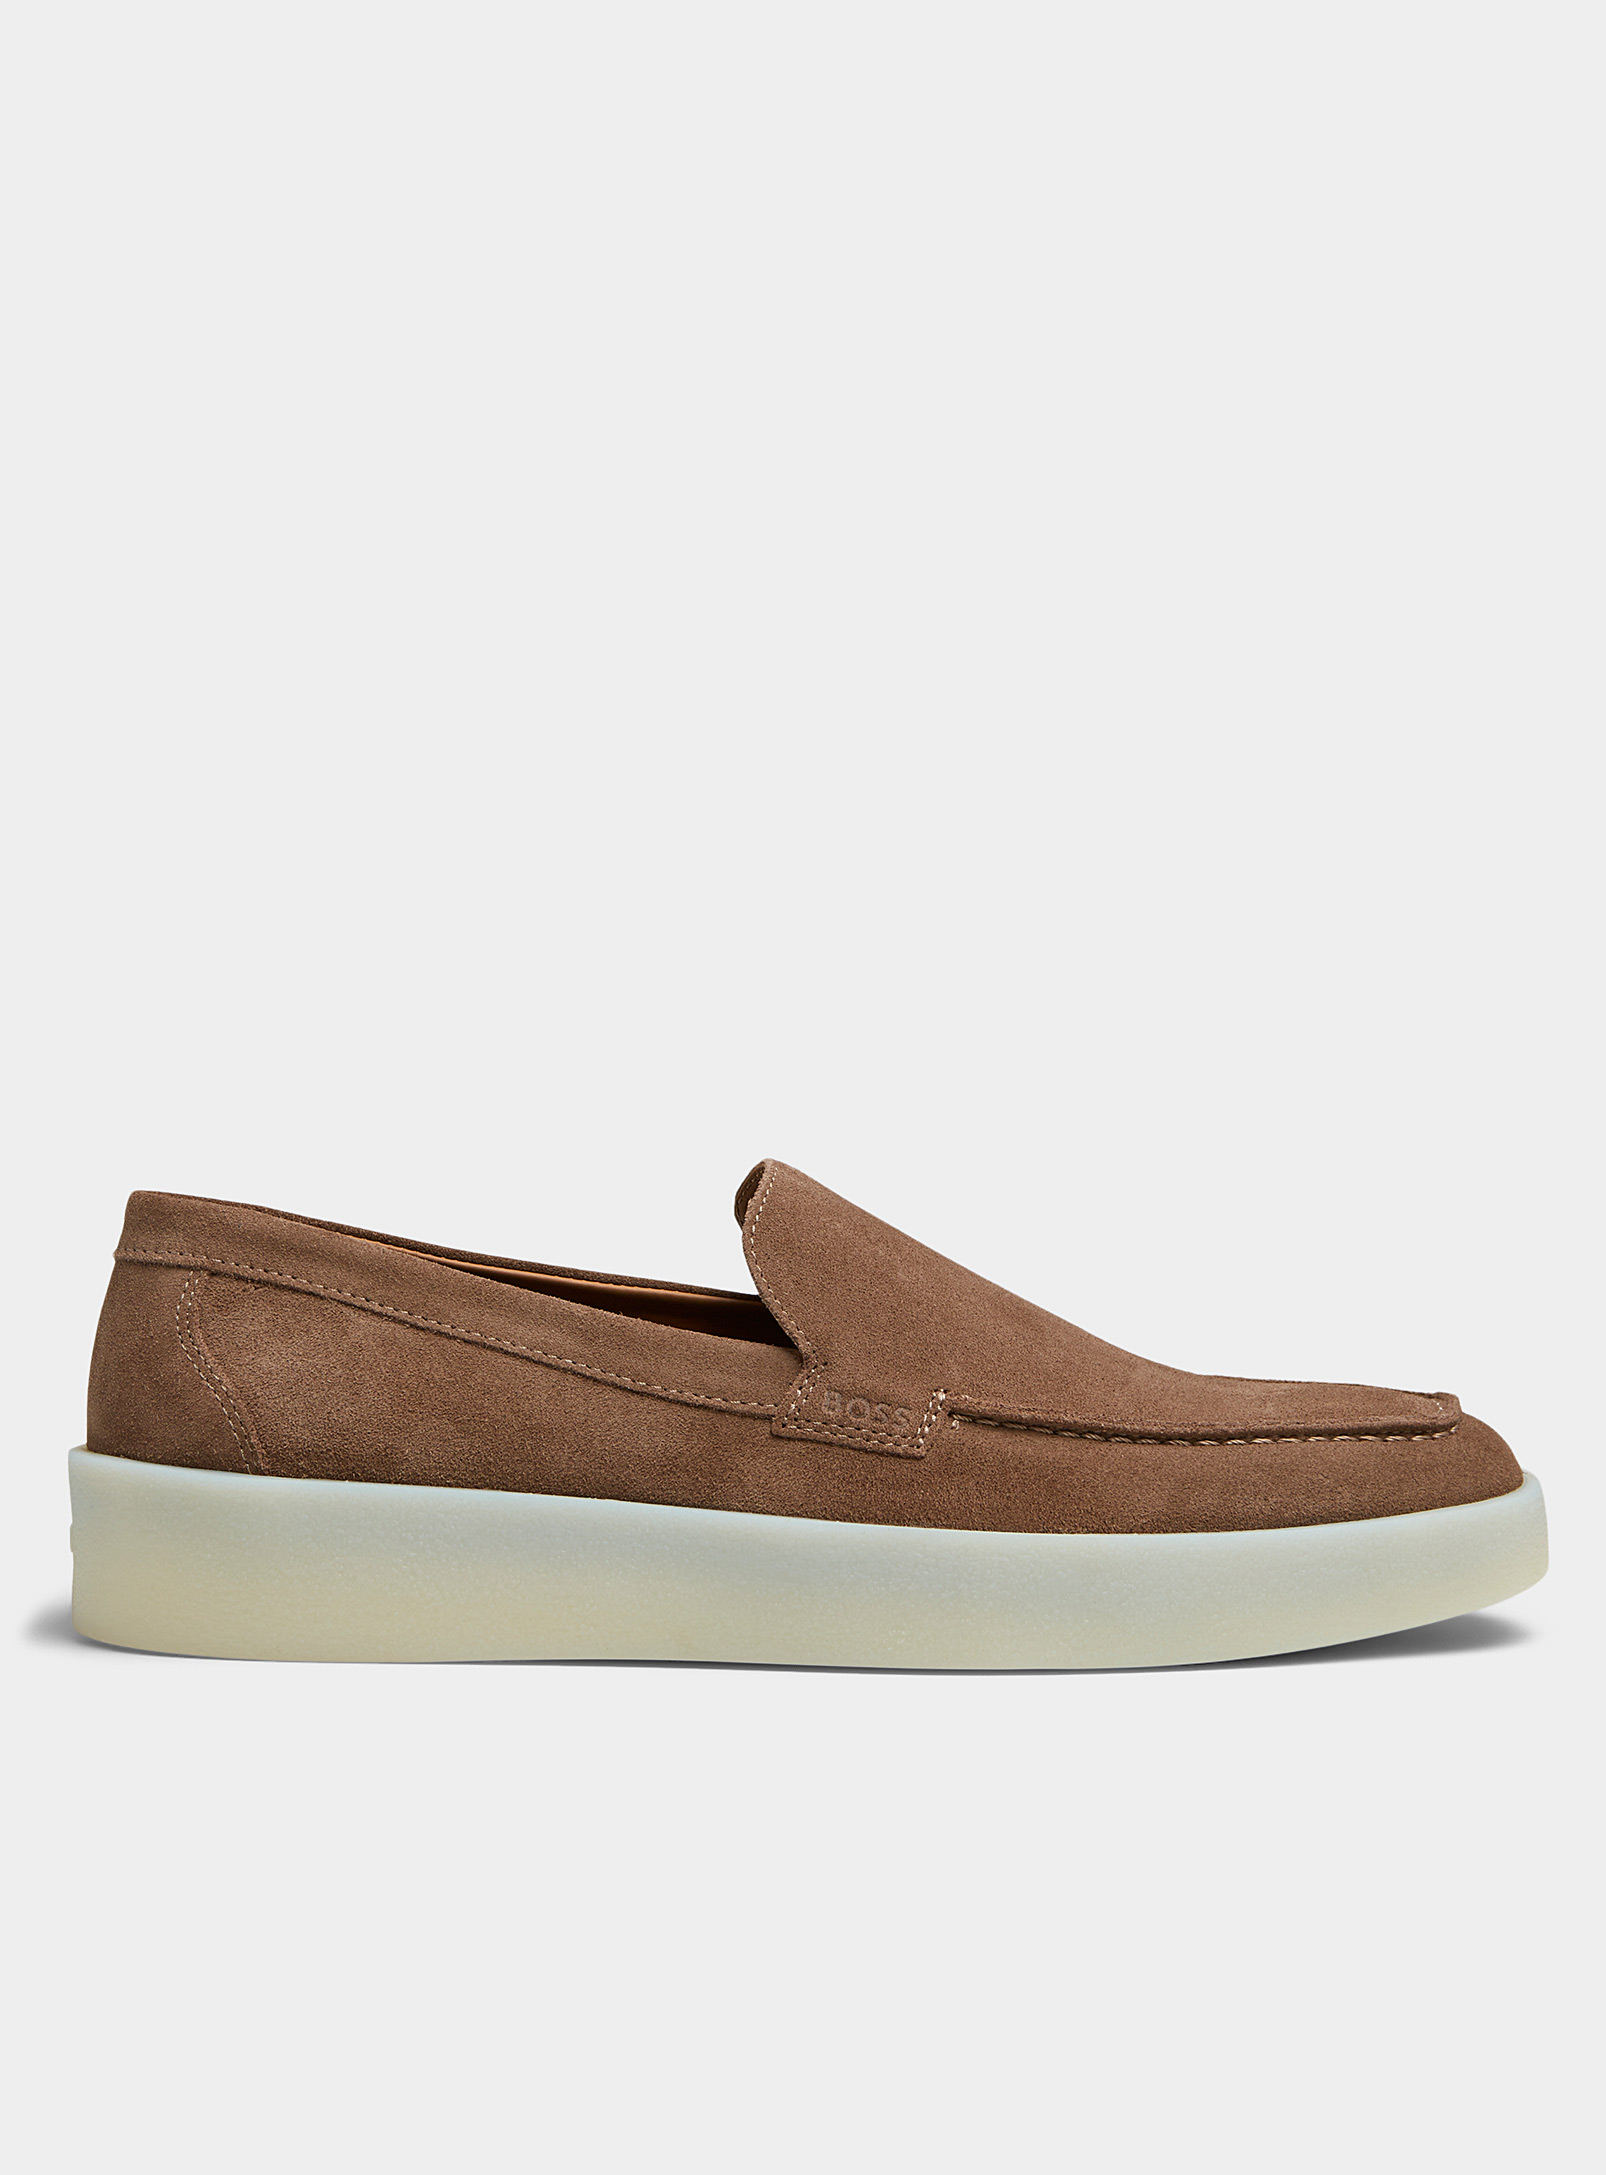 BOSS - Men's Clay casual suede loafers Men